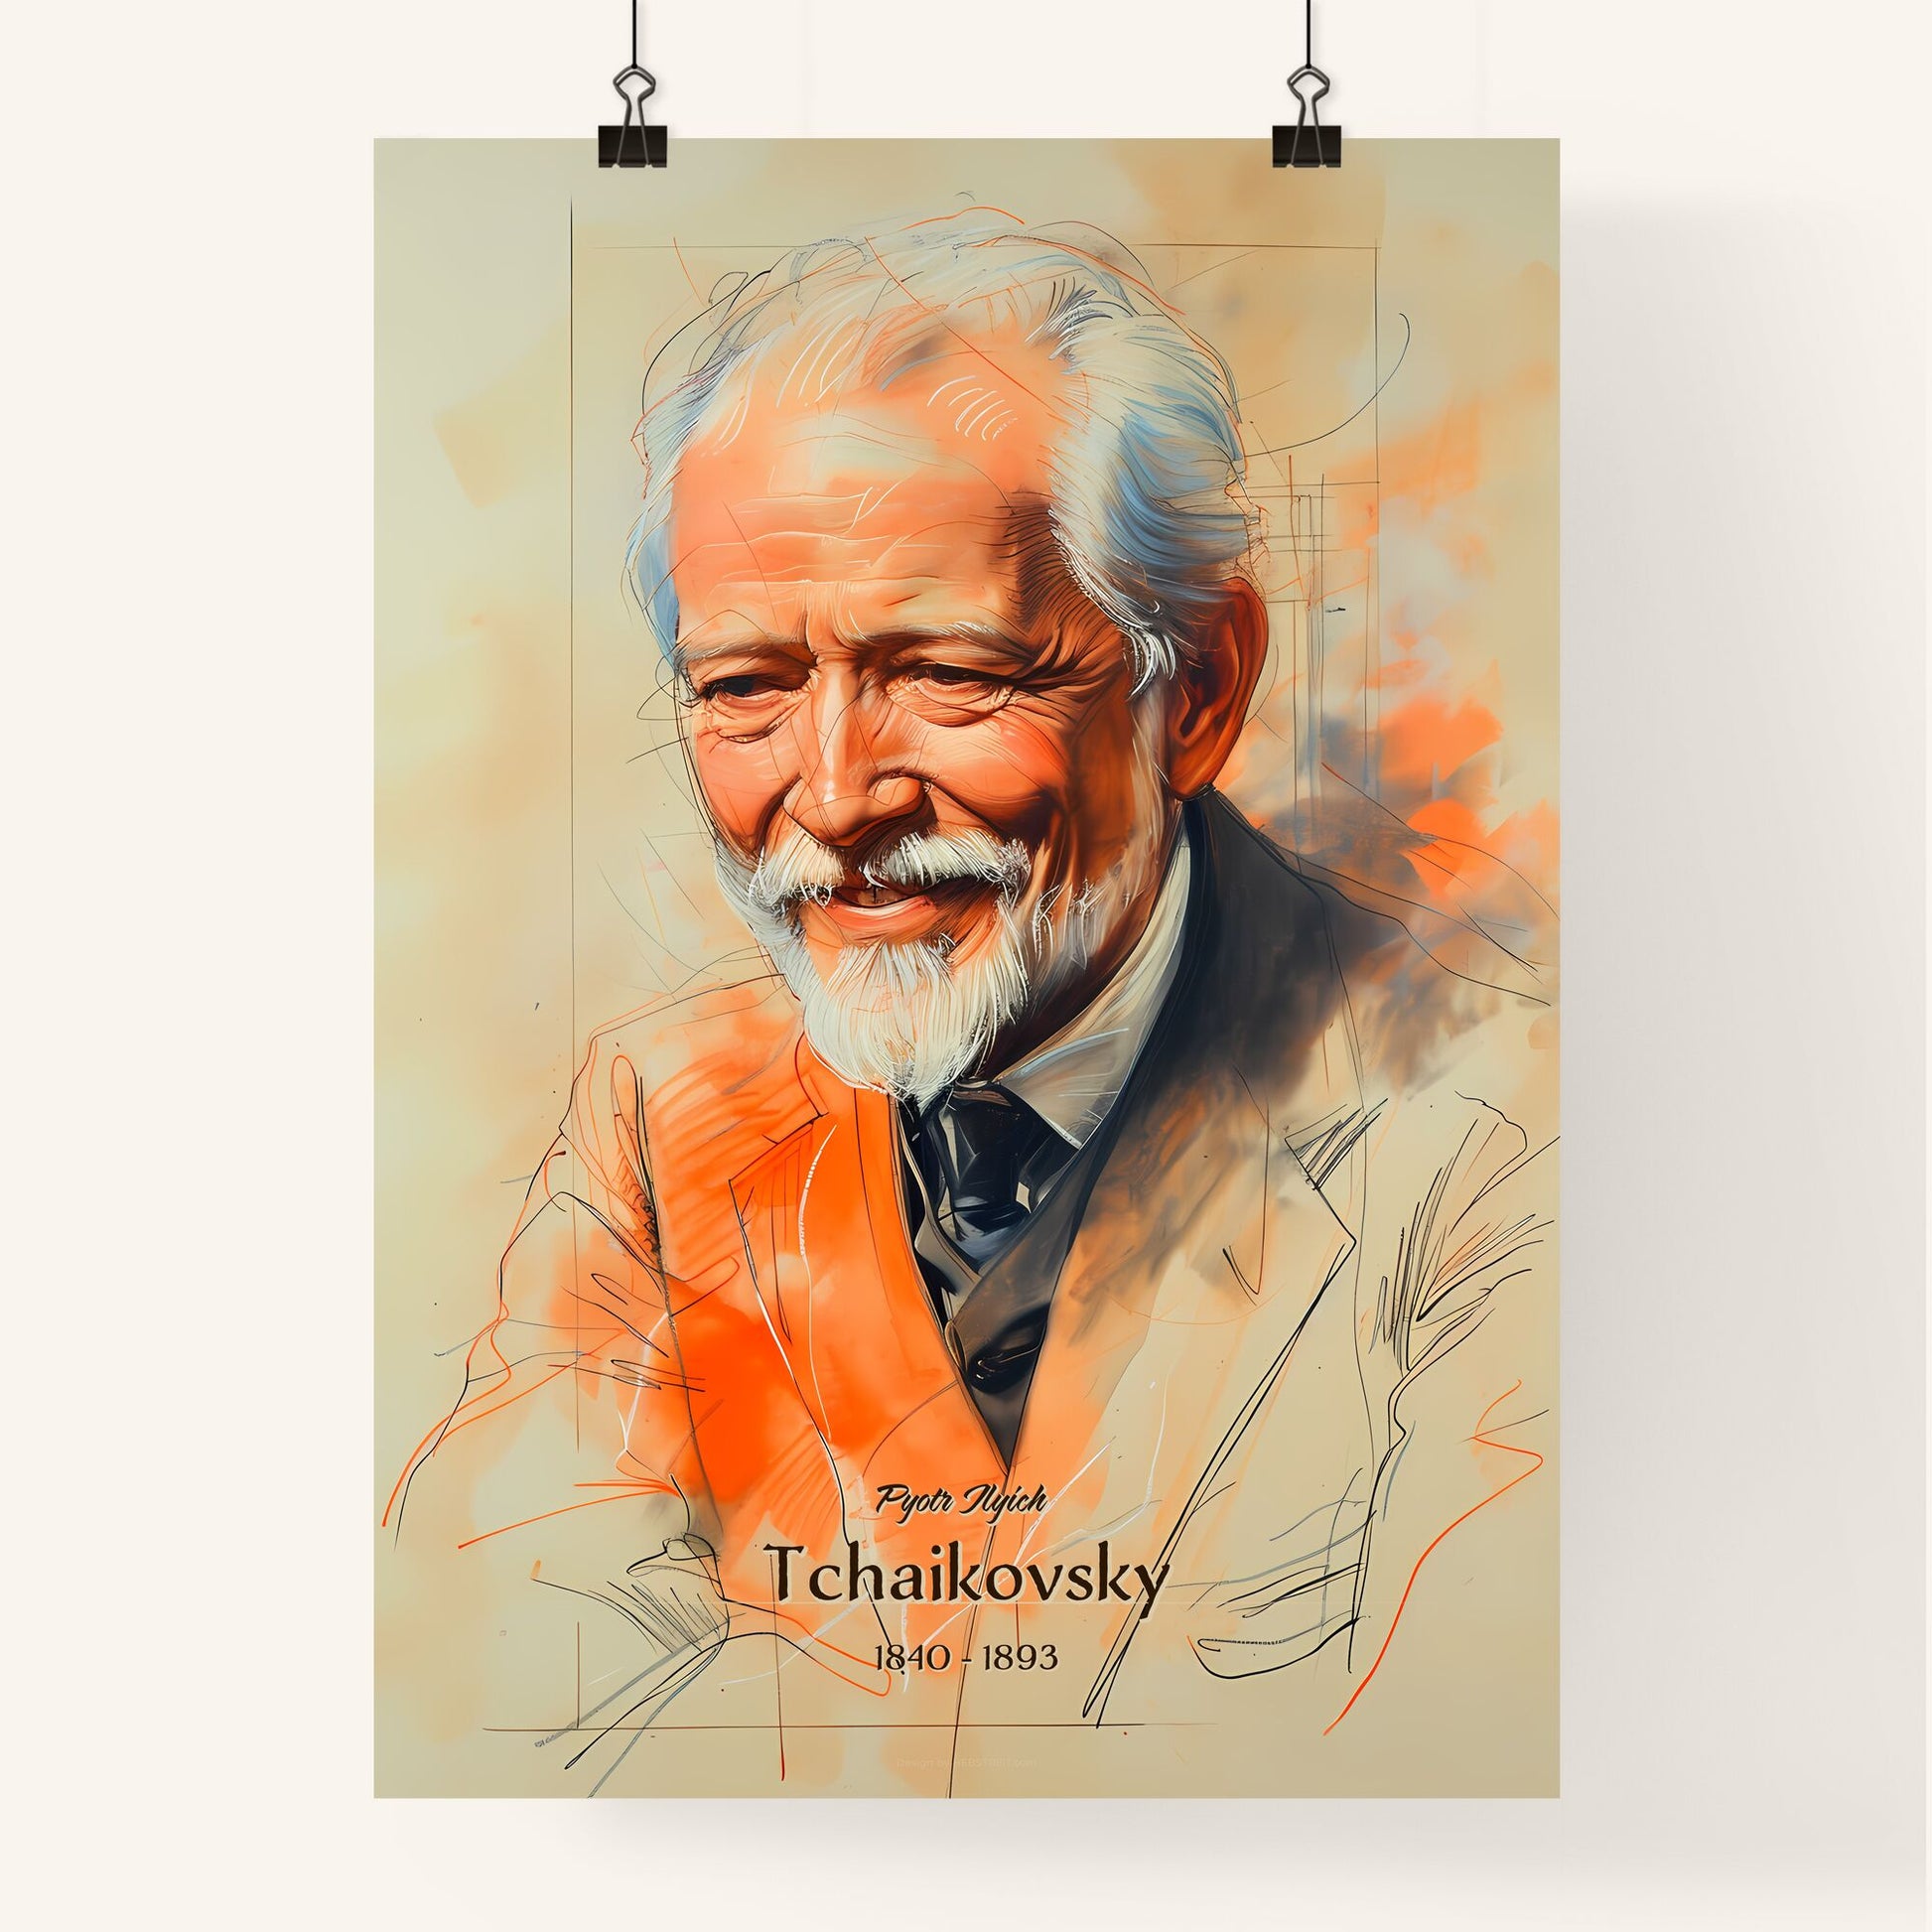 Pyotr Ilyich, Tchaikovsky, 1840 - 1893, A Poster of a drawing of a man with a beard Default Title